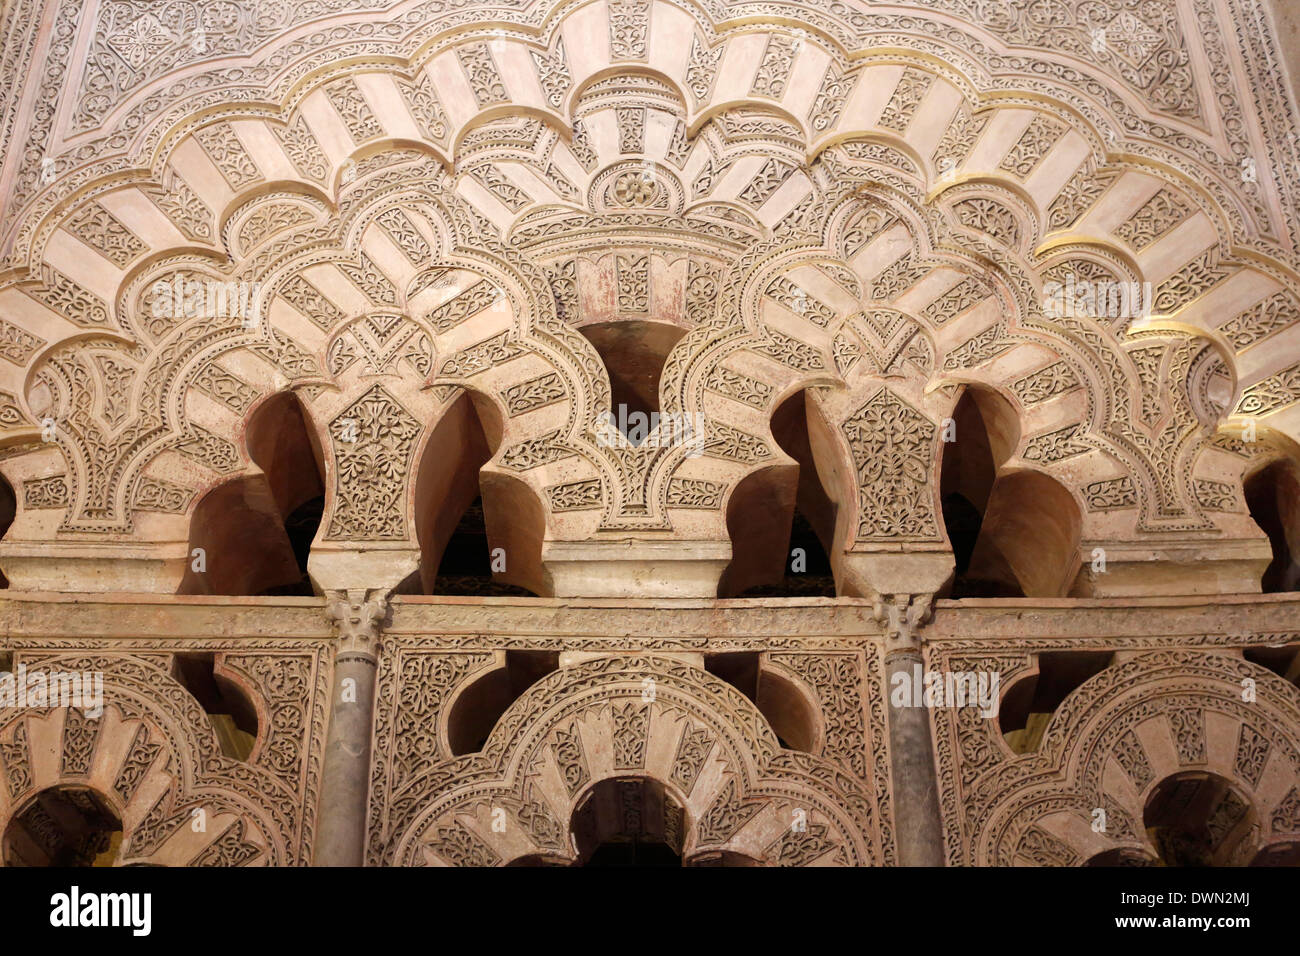 Arch carvings at the Cordoba Mezquita (Great Mosque), UNESCO World Heritage Site, Cordoba, Andalucia, Spain, Europe Stock Photo